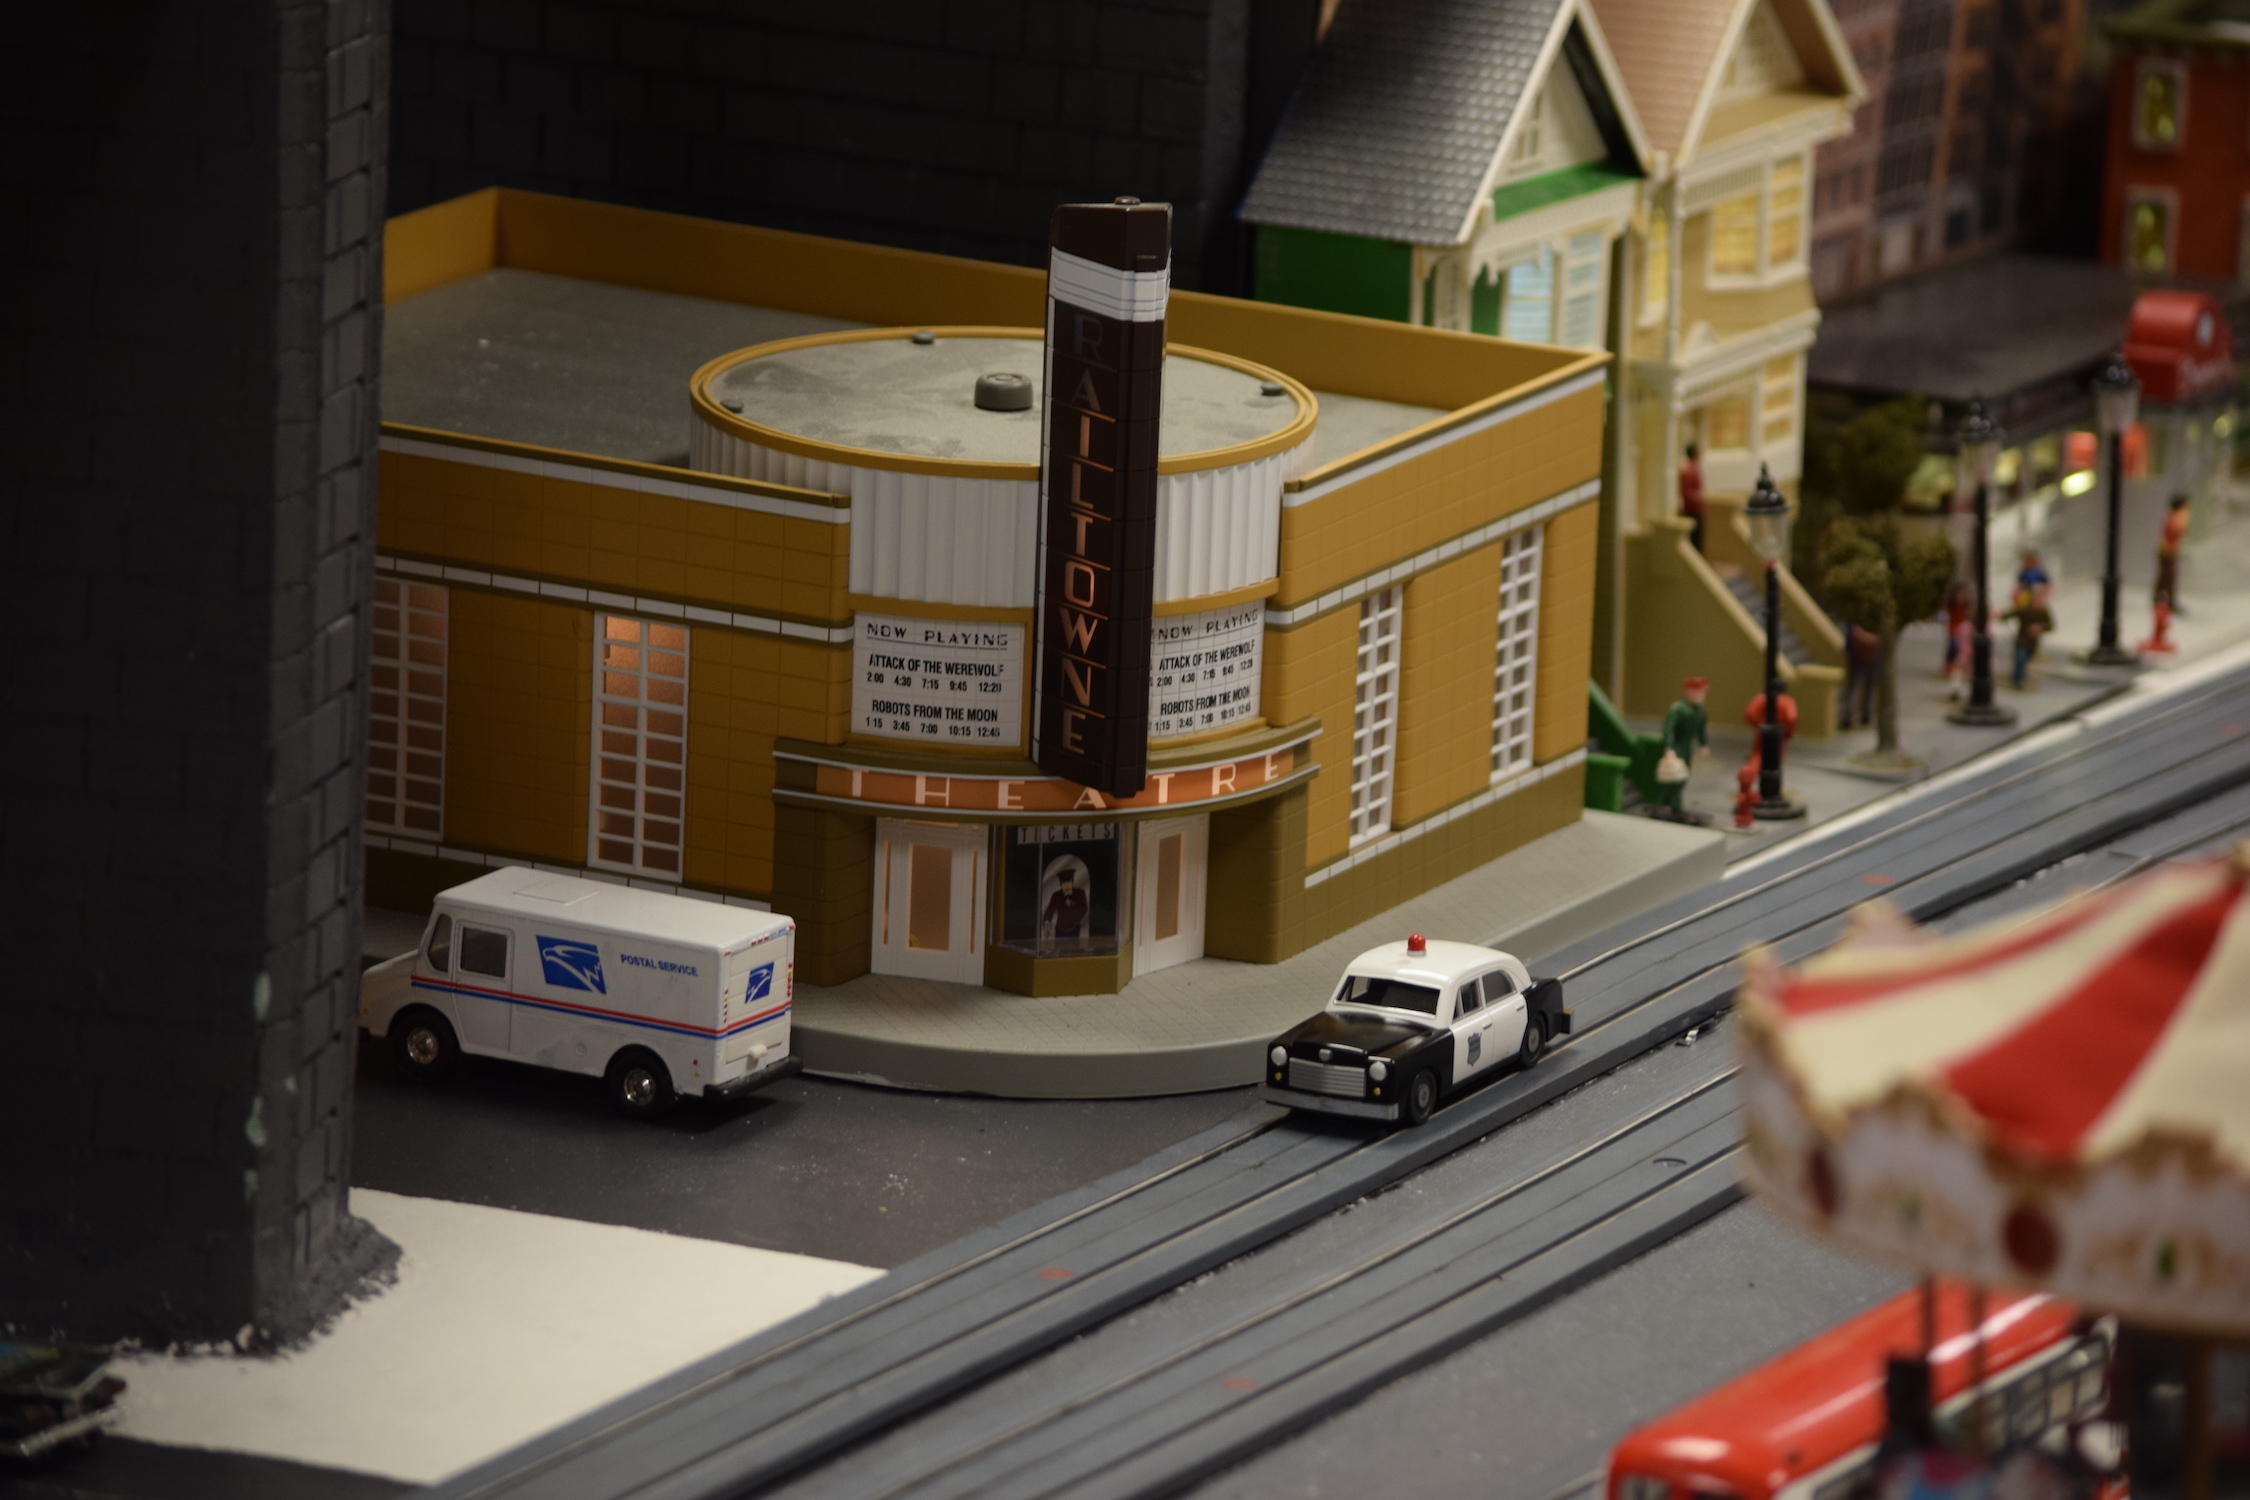 A movie theatre in town with a police car parked in front - "Christmas at the Roundhouse" model train display.